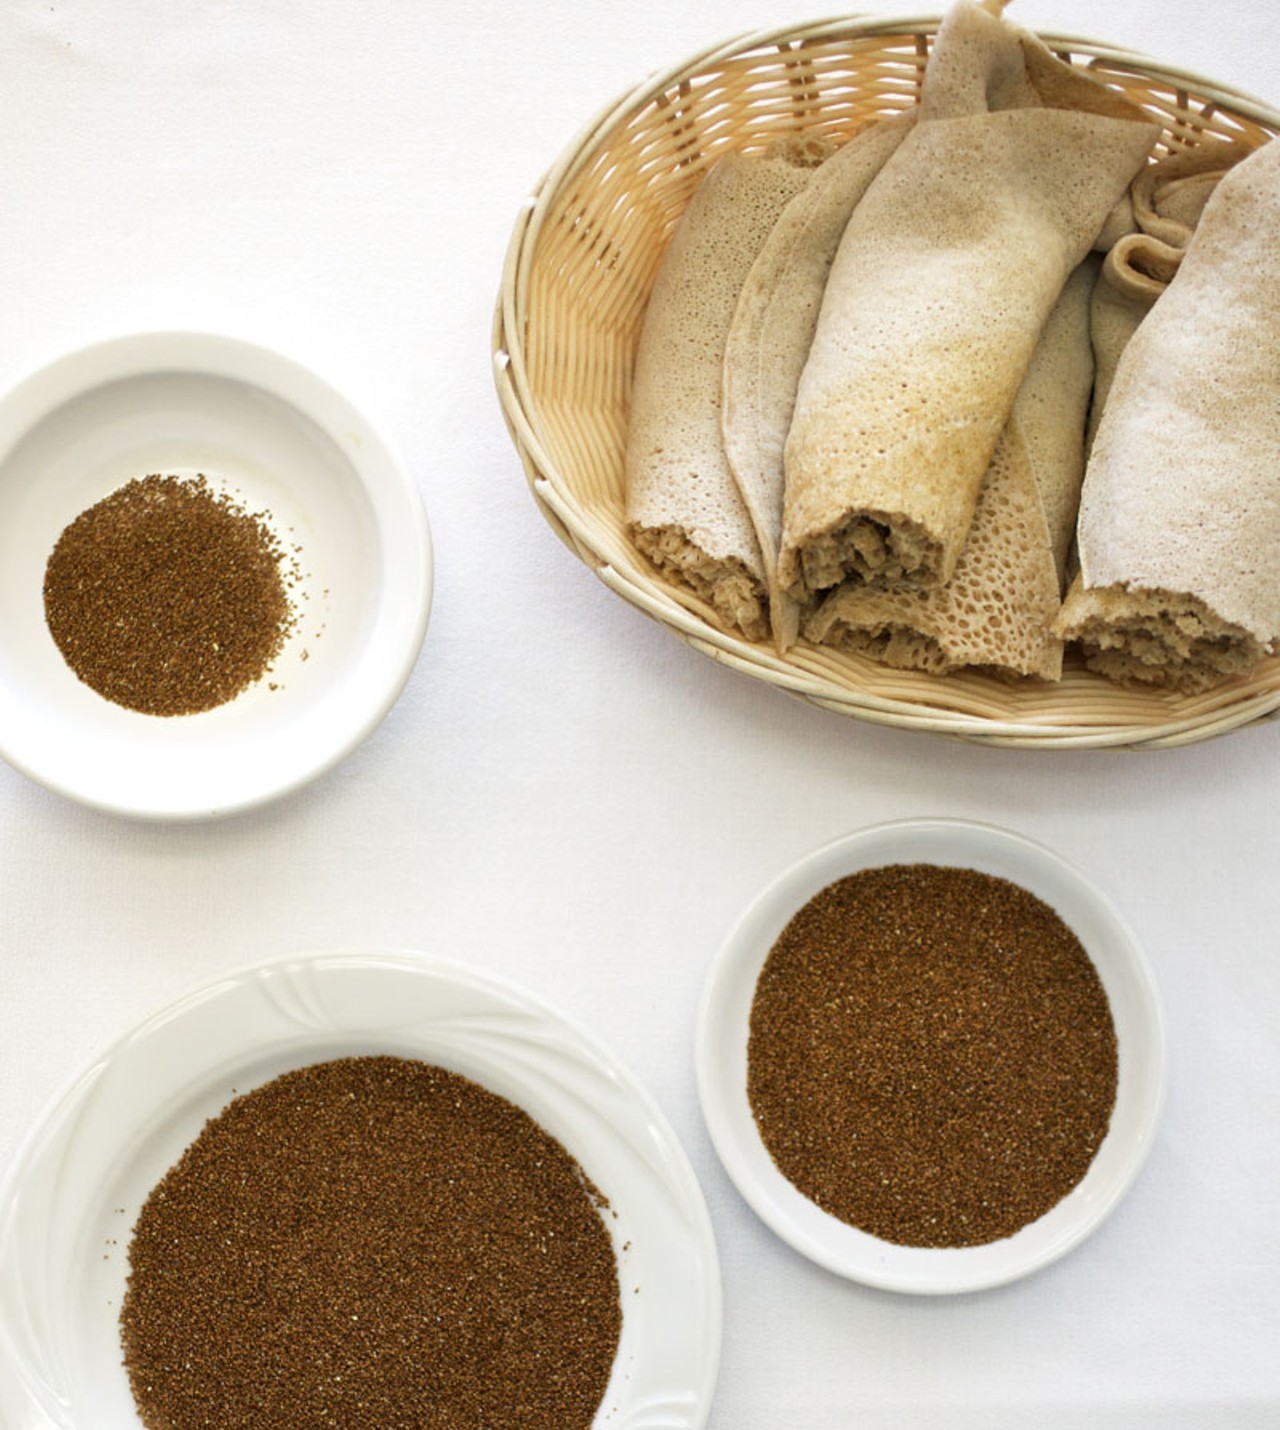 The Ethiopian bread, Engera, is made from a tiny seed called Tef, which I am told is found exclusively in Ethiopia.